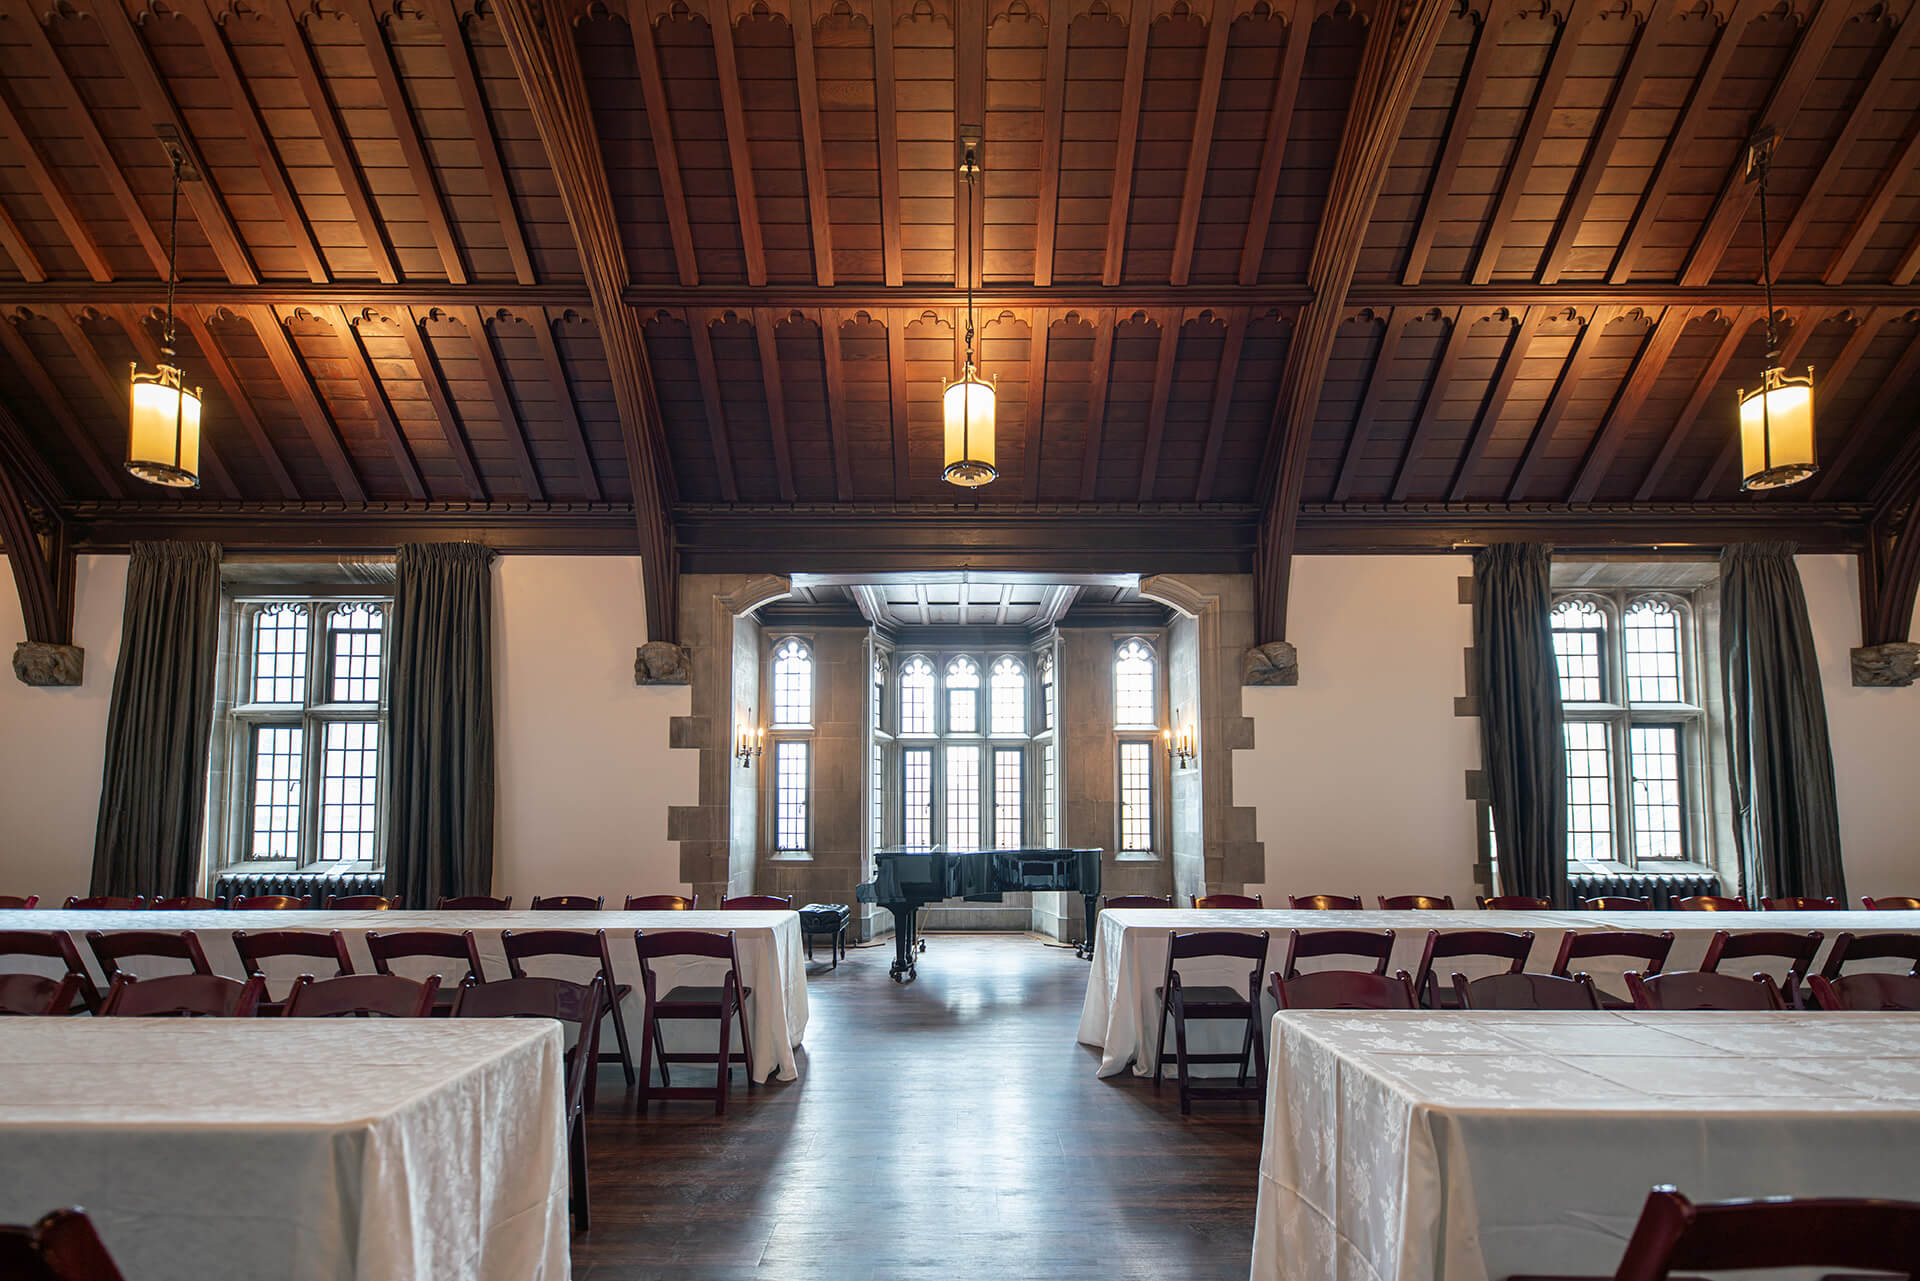 A large room with hardwood floors, gothic windows, vaulted wooden ceiling and tables with seating arranged for an event